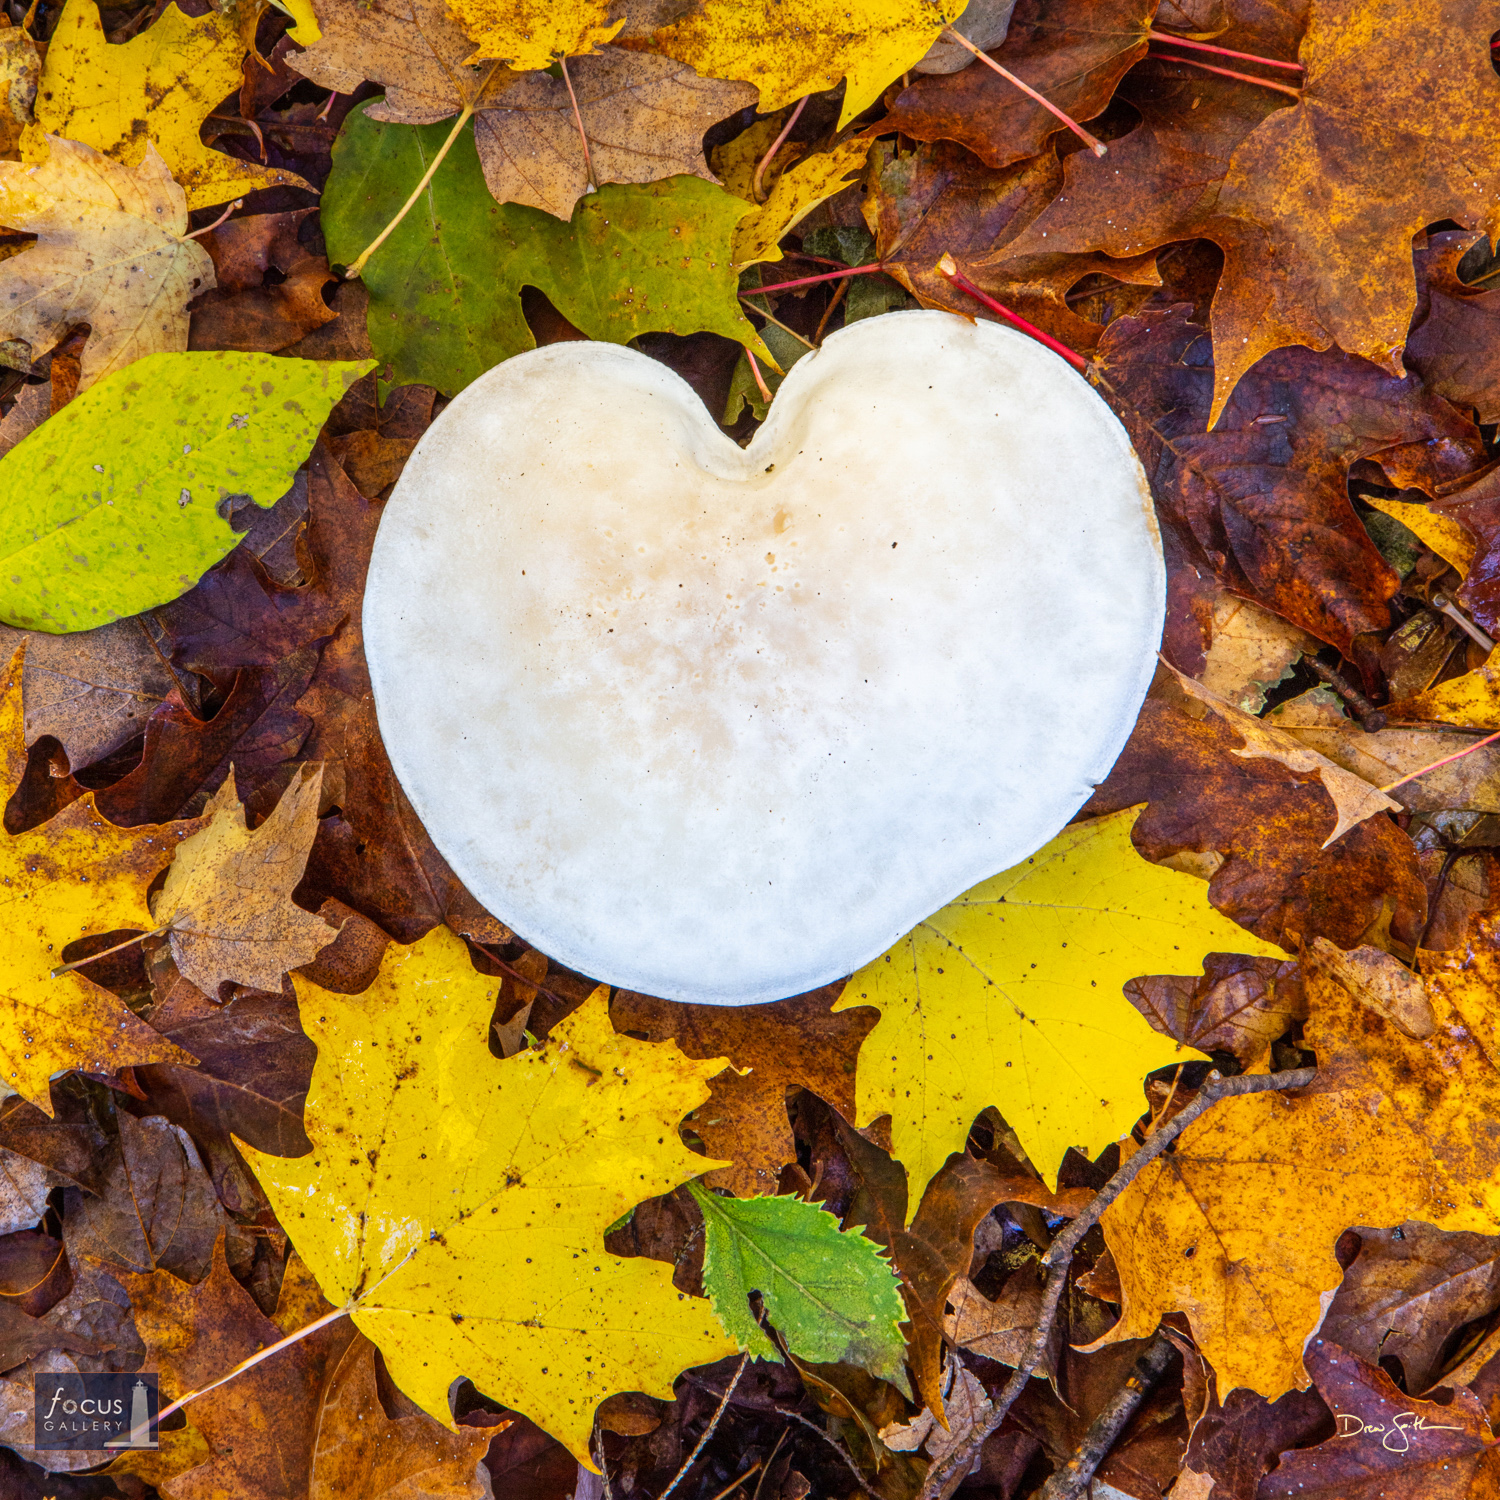 Photo © Drew Smith A heart-shaped mushroom surrounded by beautiful fall leaves - Autumn Love! This image is also available in...